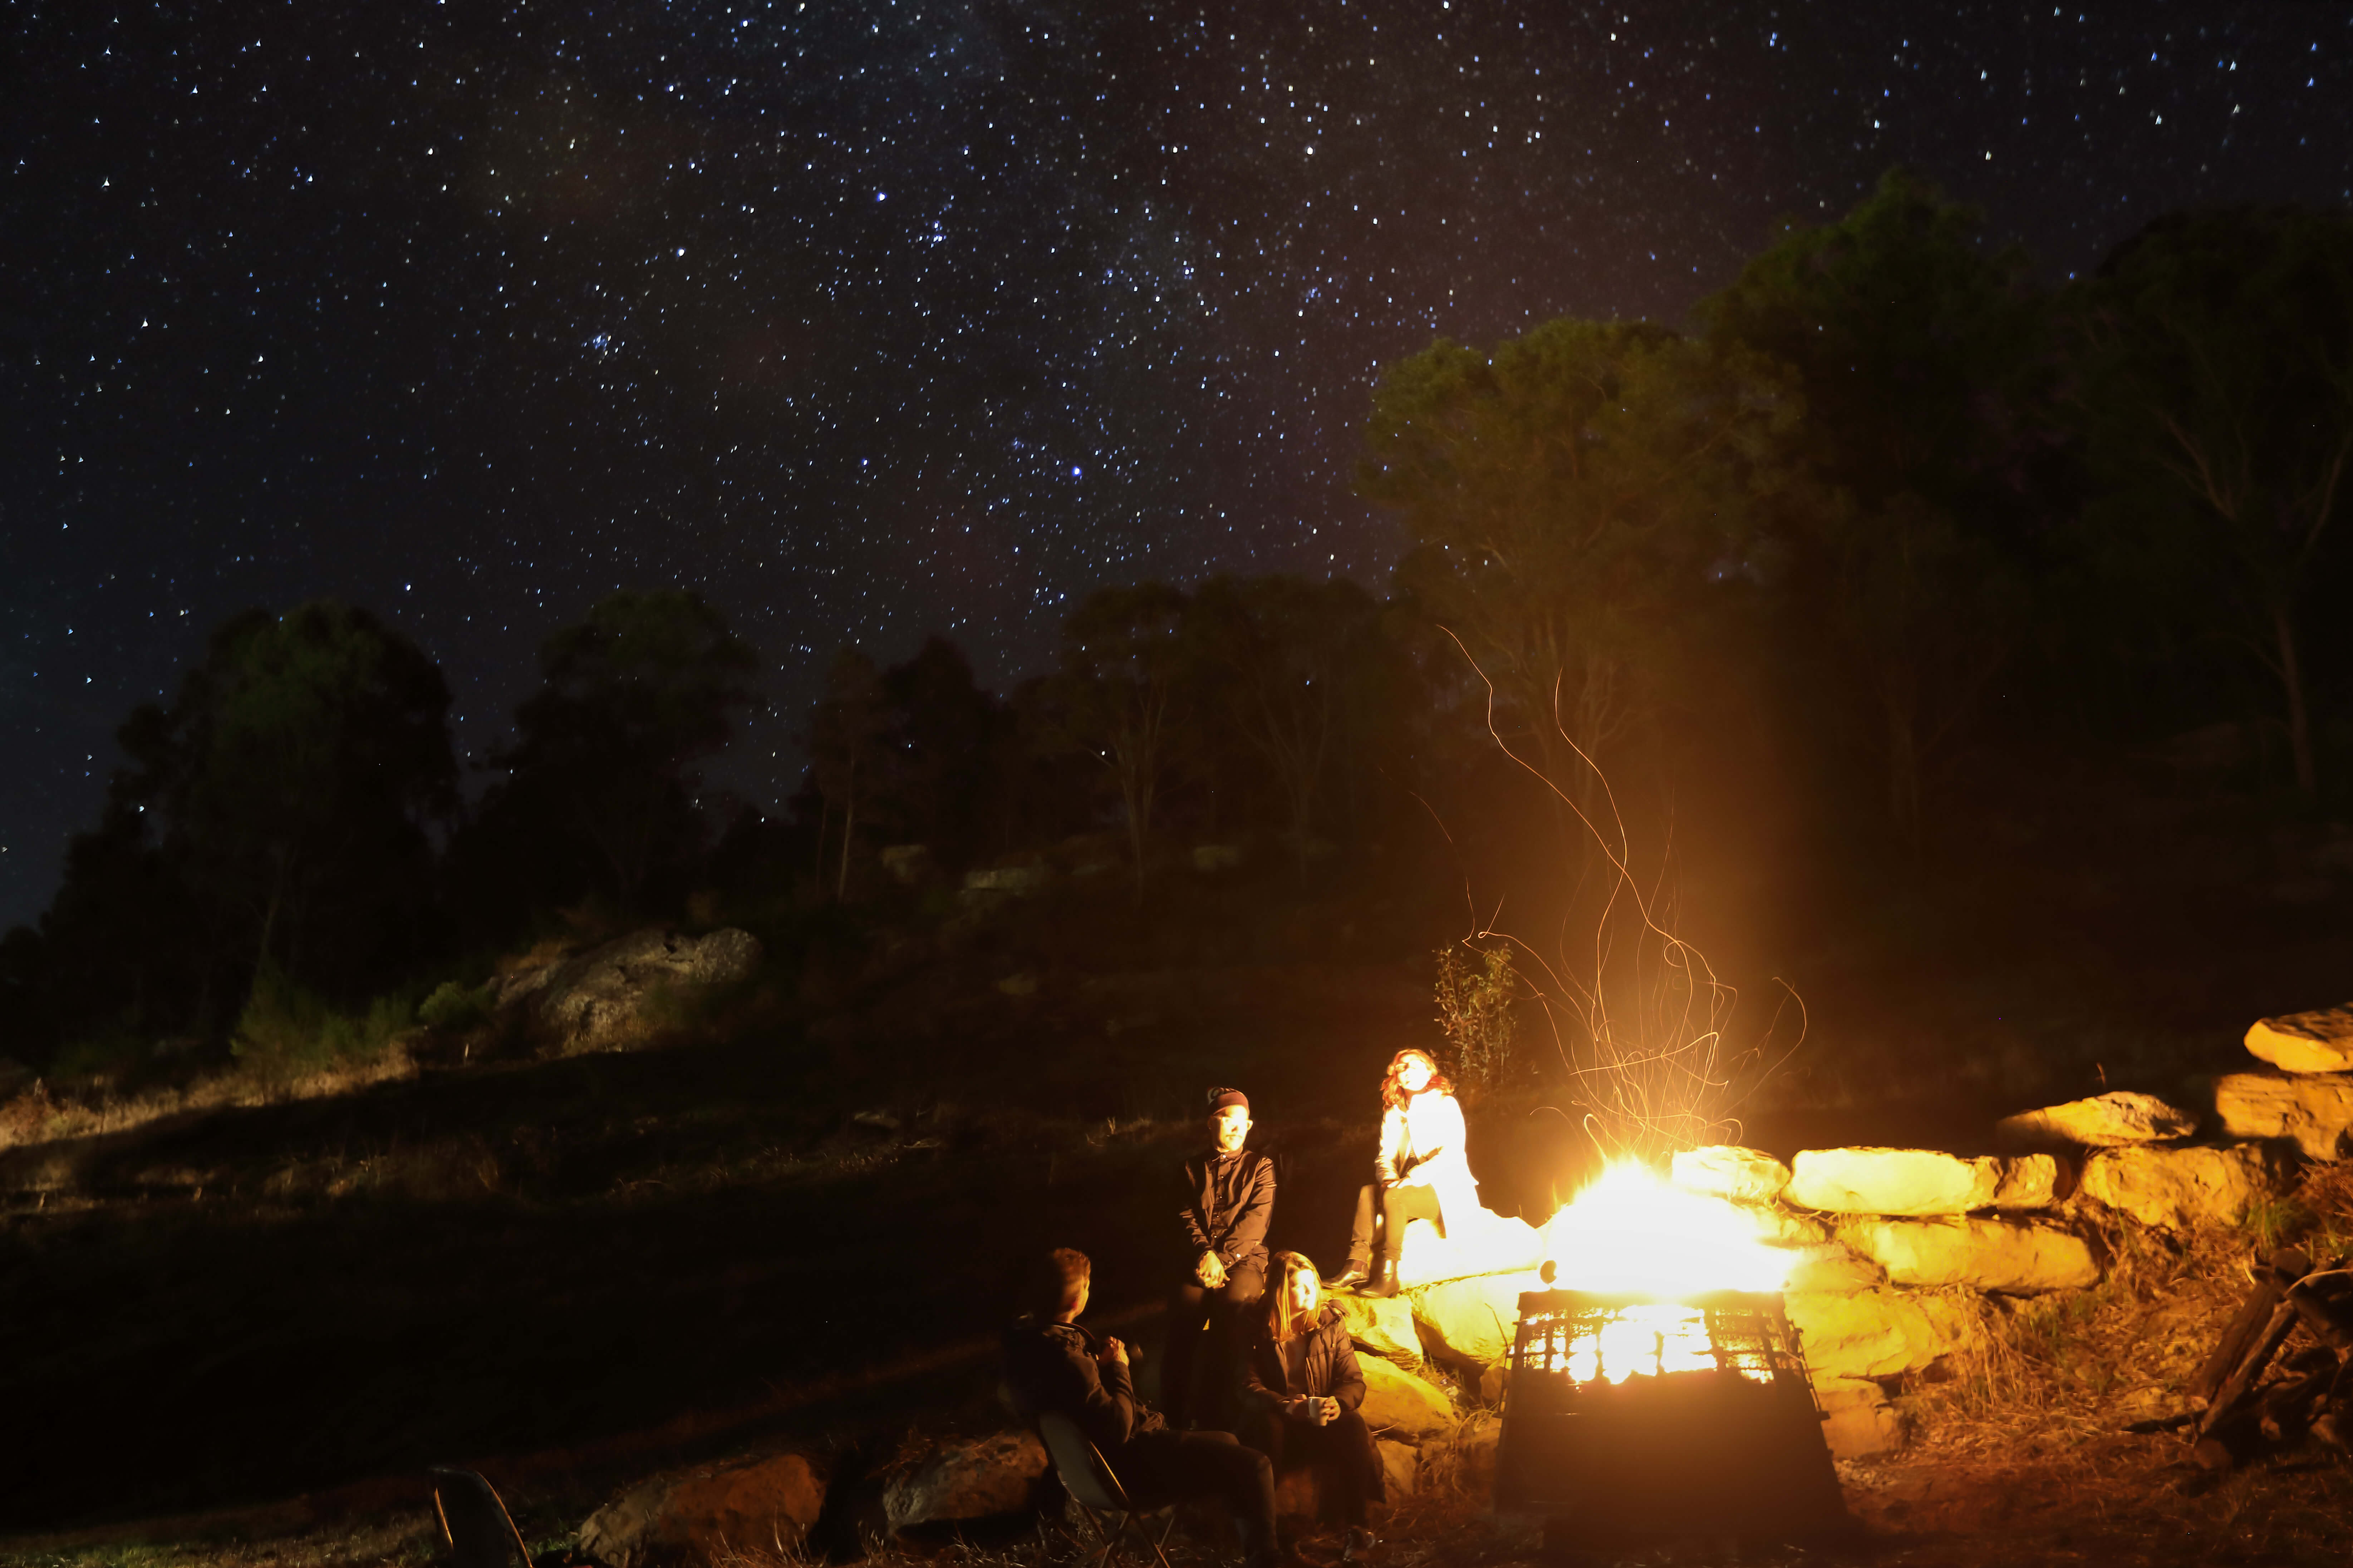 Image of stars and friends around a campfire taken by Dr Chris Brown